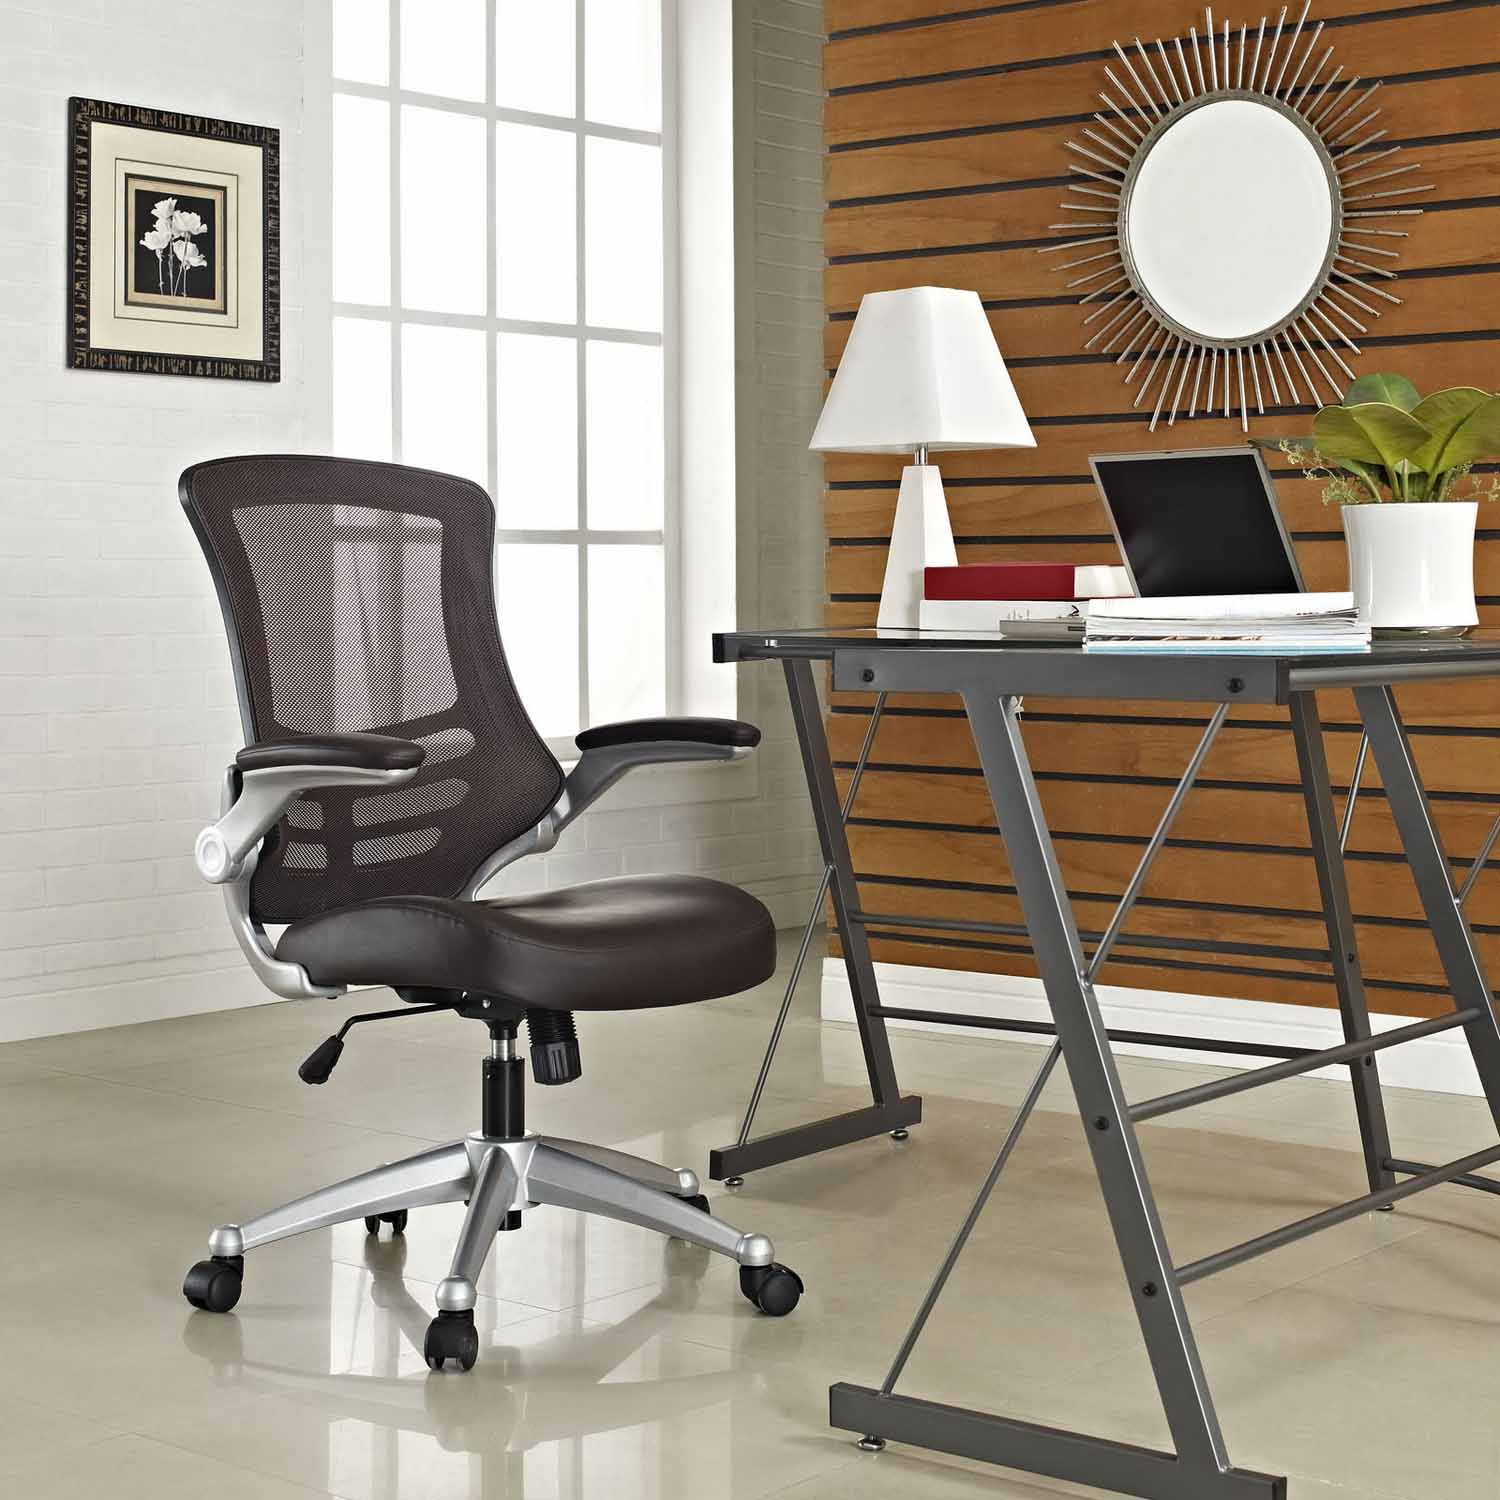 Modway Attainment Office Chair - Brown